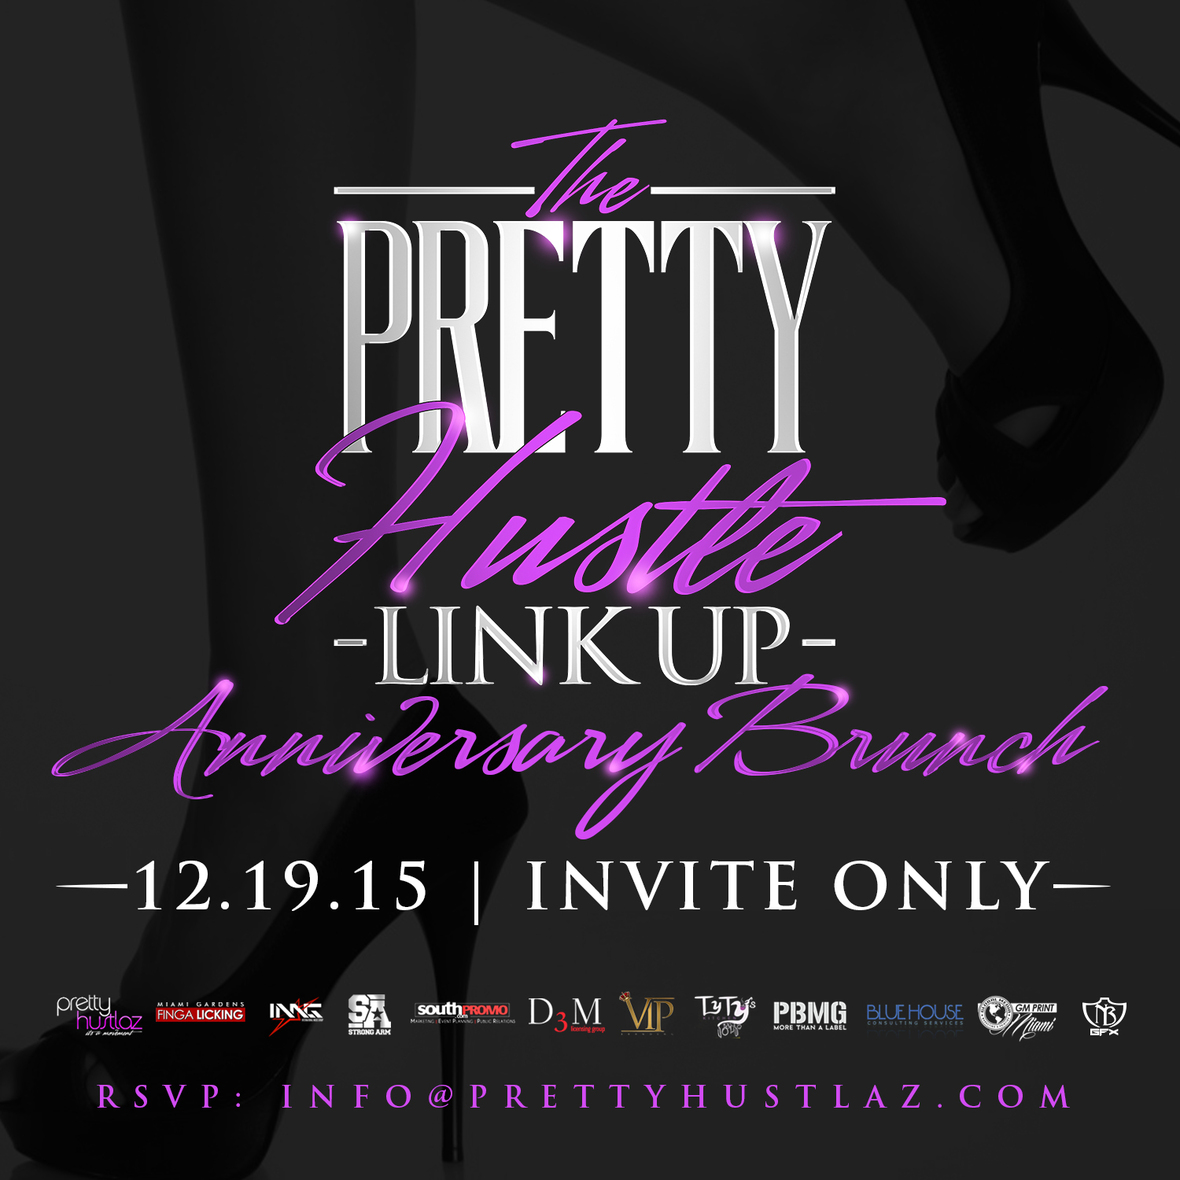 The Pretty Hustle Link Up Anniversary Brunch